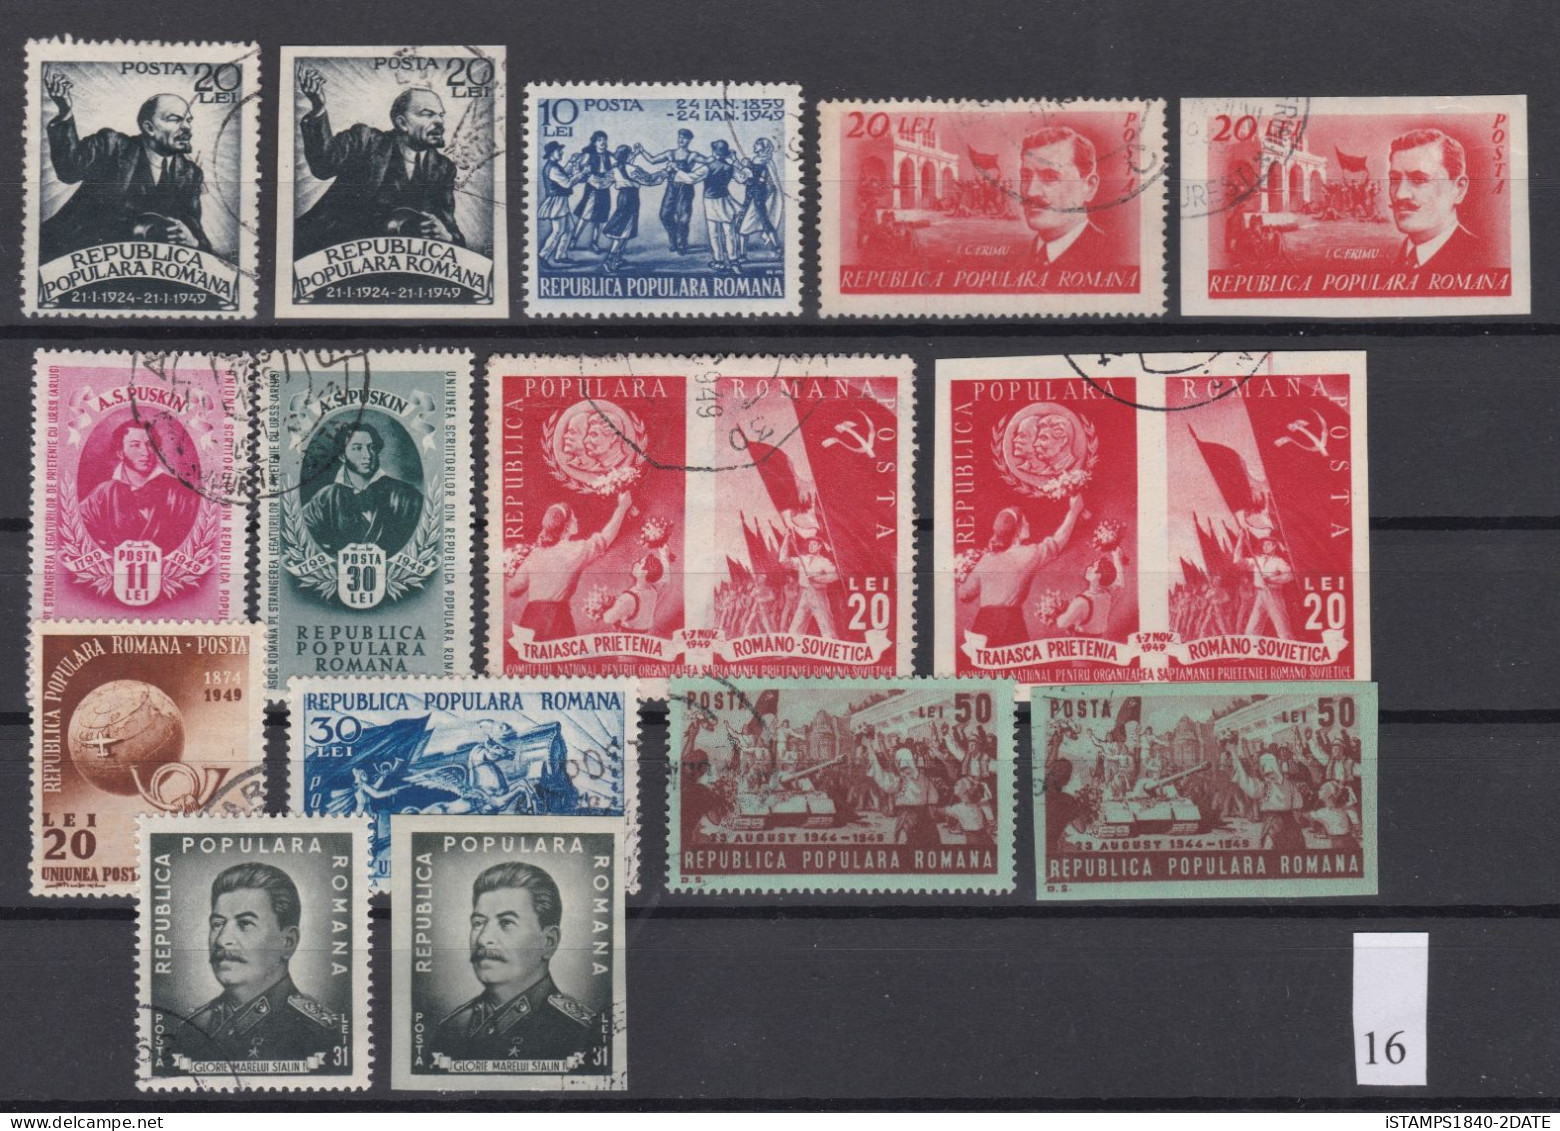 001197/ Romania 1872-1950s Collection Fine Used/ Used (450) Large Cat Value